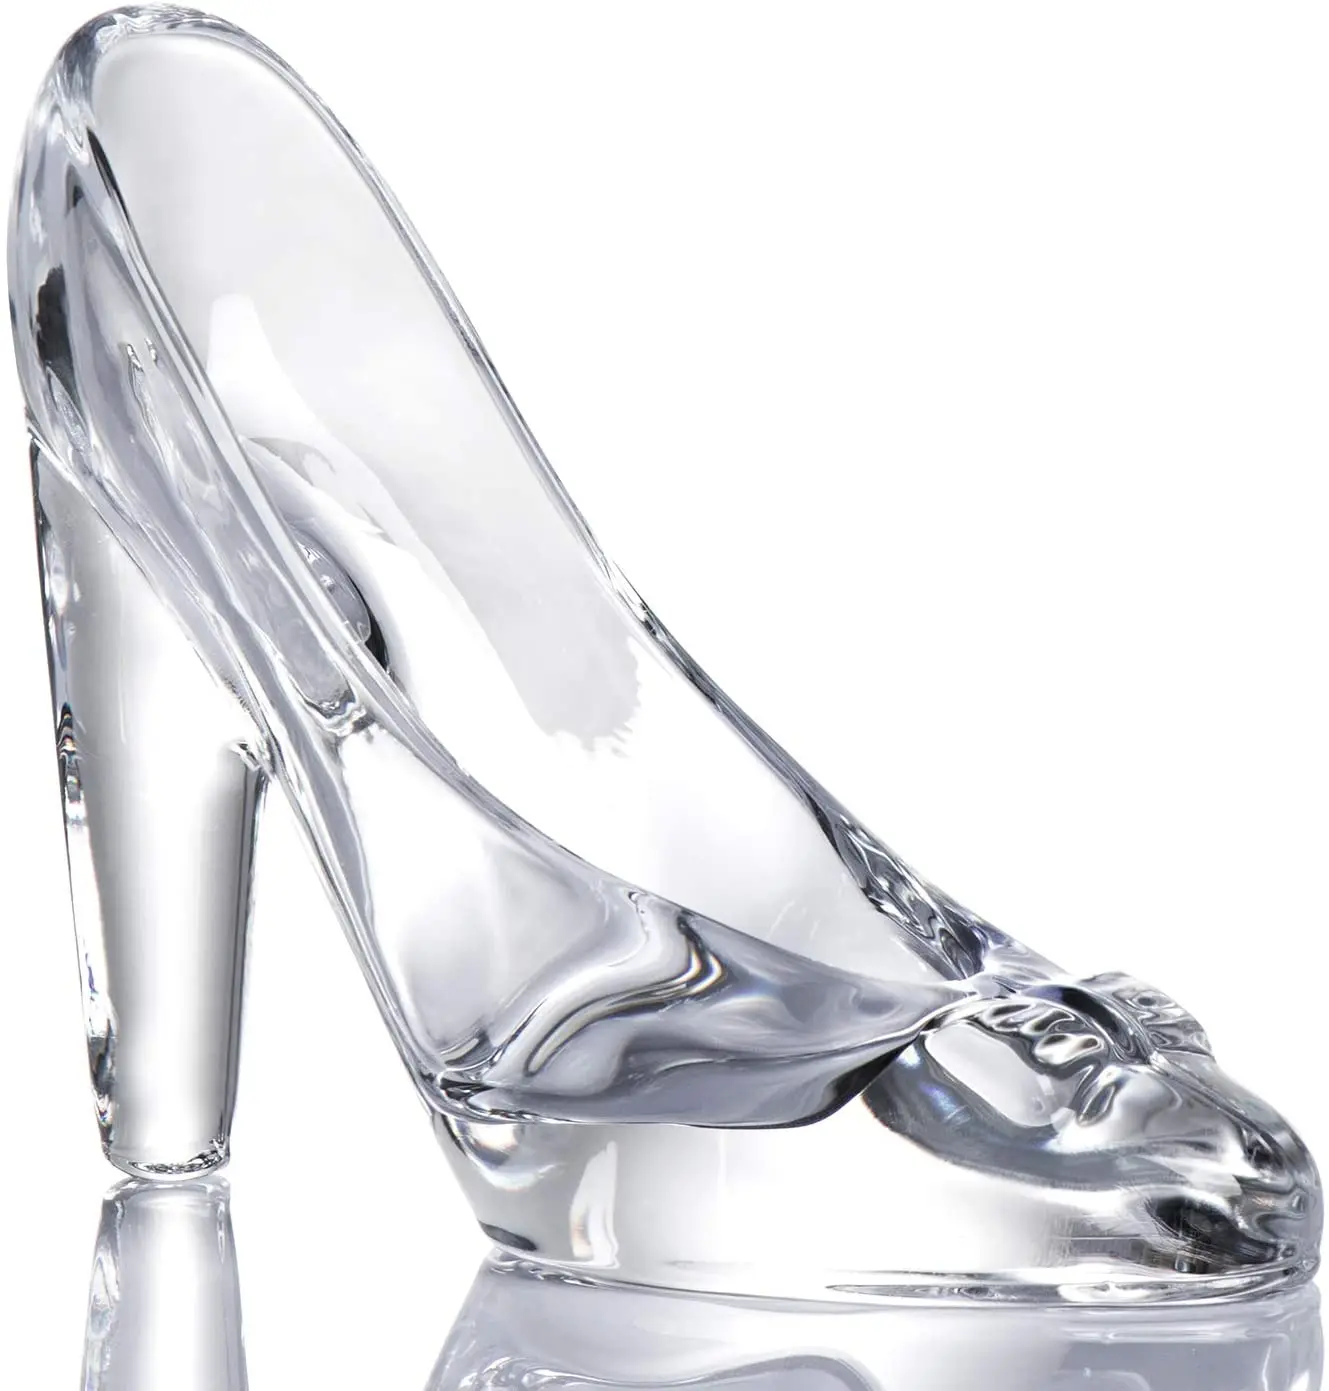 Crystal Shoes Glass Birthday Gift Home Decor Cinderella Shoes with High  Heels Wedding Shoes Figures : Amazon.de: Home & Kitchen